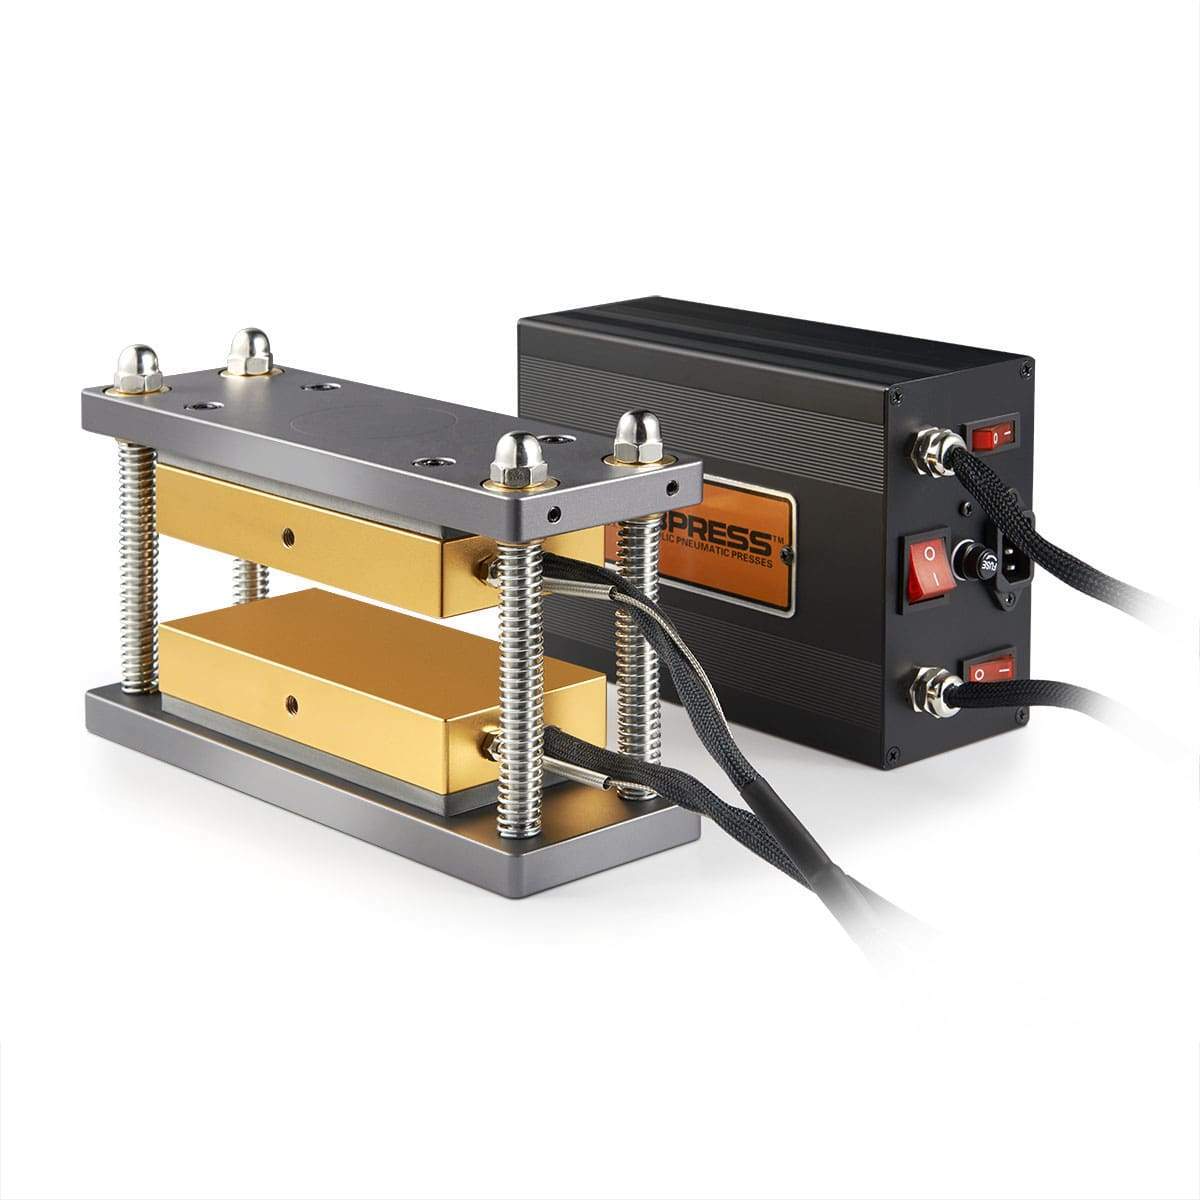 20 Ton Rosin Press - Pairs it Well with A 12-20 Ton H-frame Hydraulic Presses - 600W | Dabpress